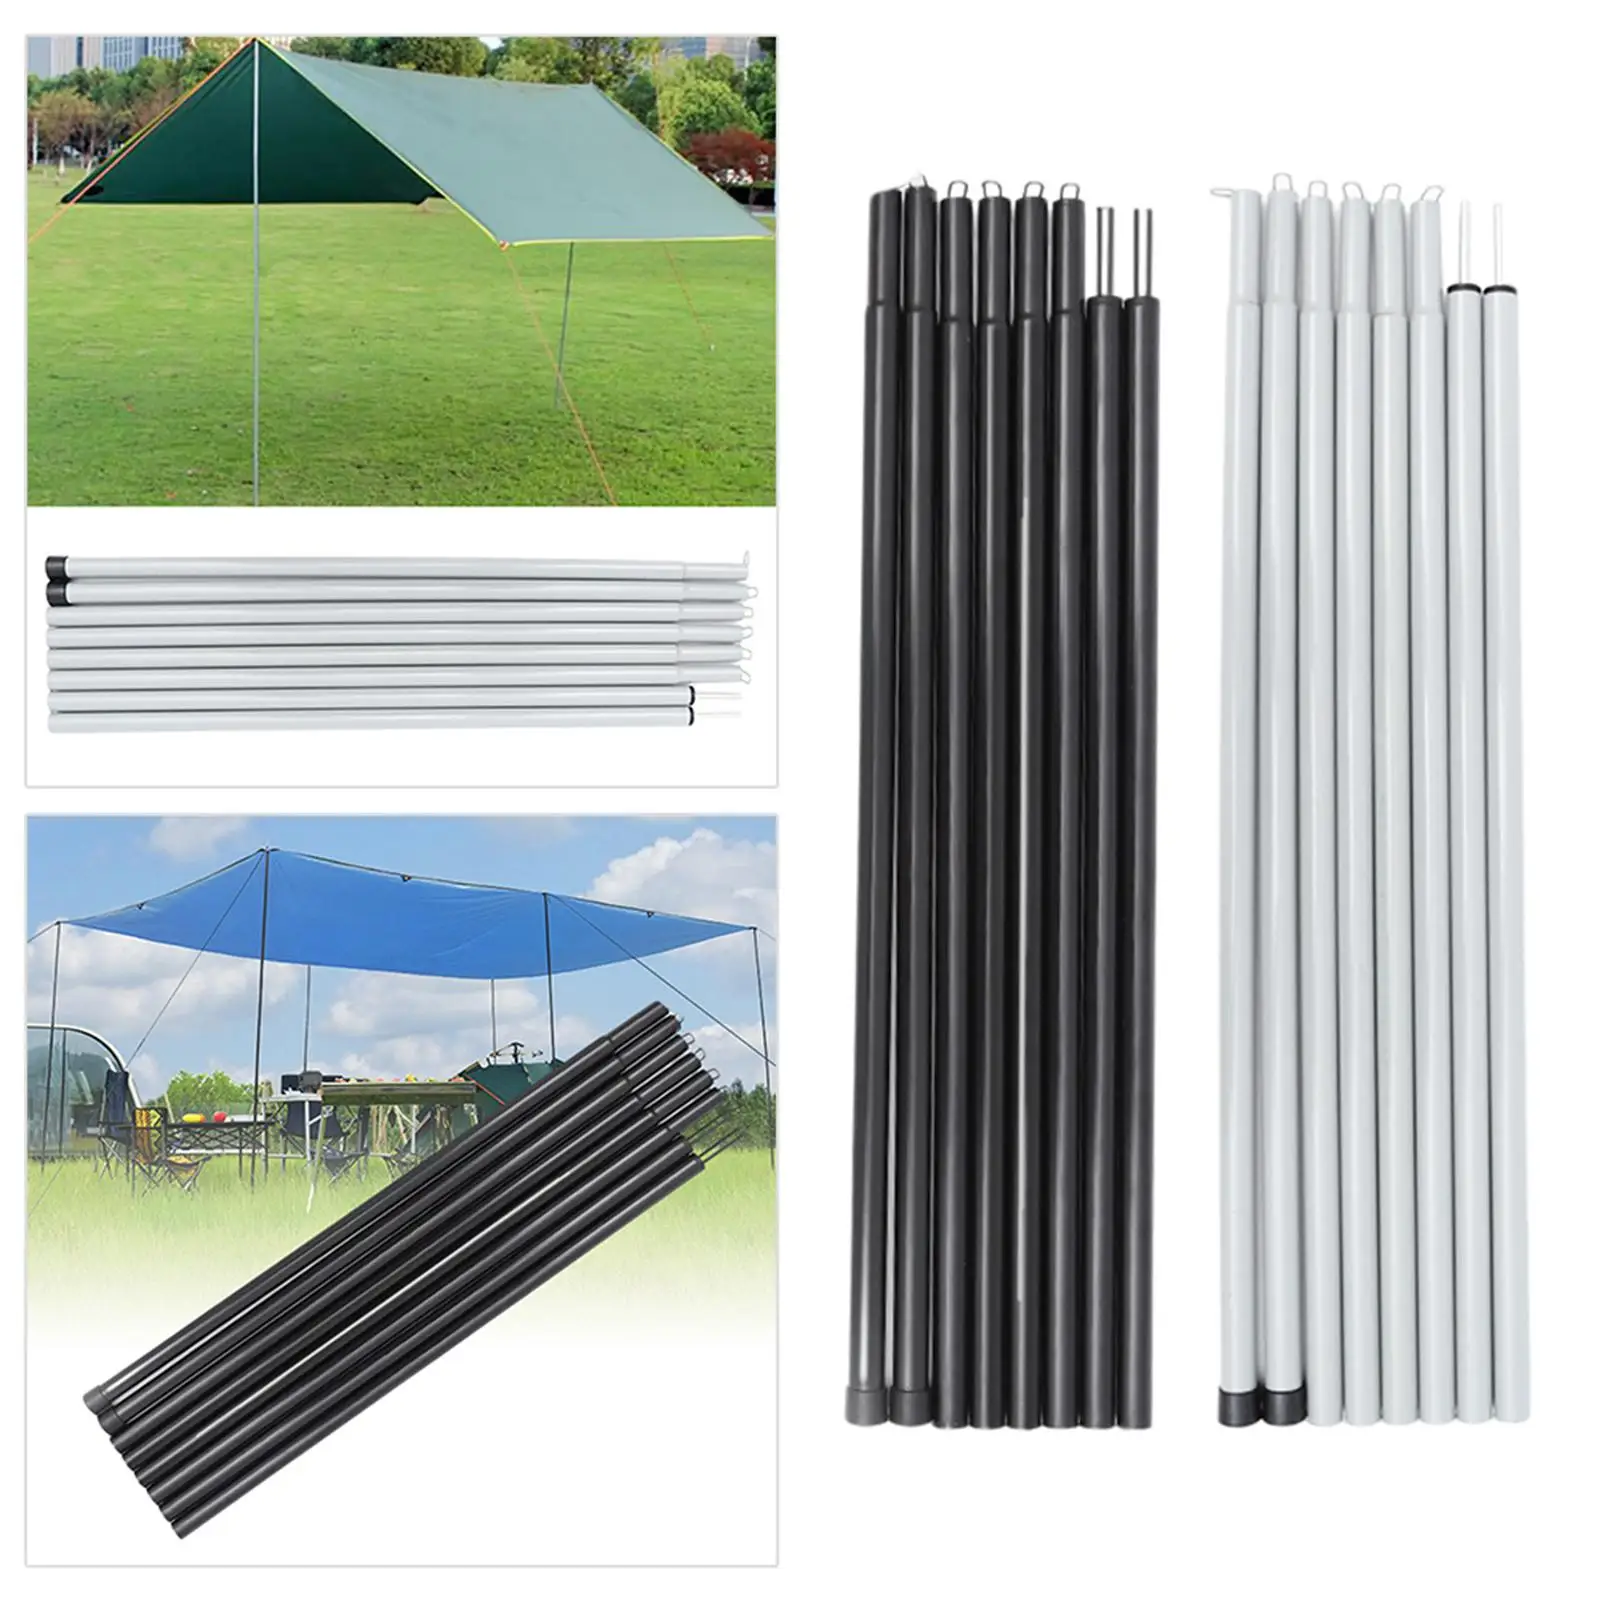 Tent Support Rod Collapsible Adjustable for Shelters Tarp Awning Hiking